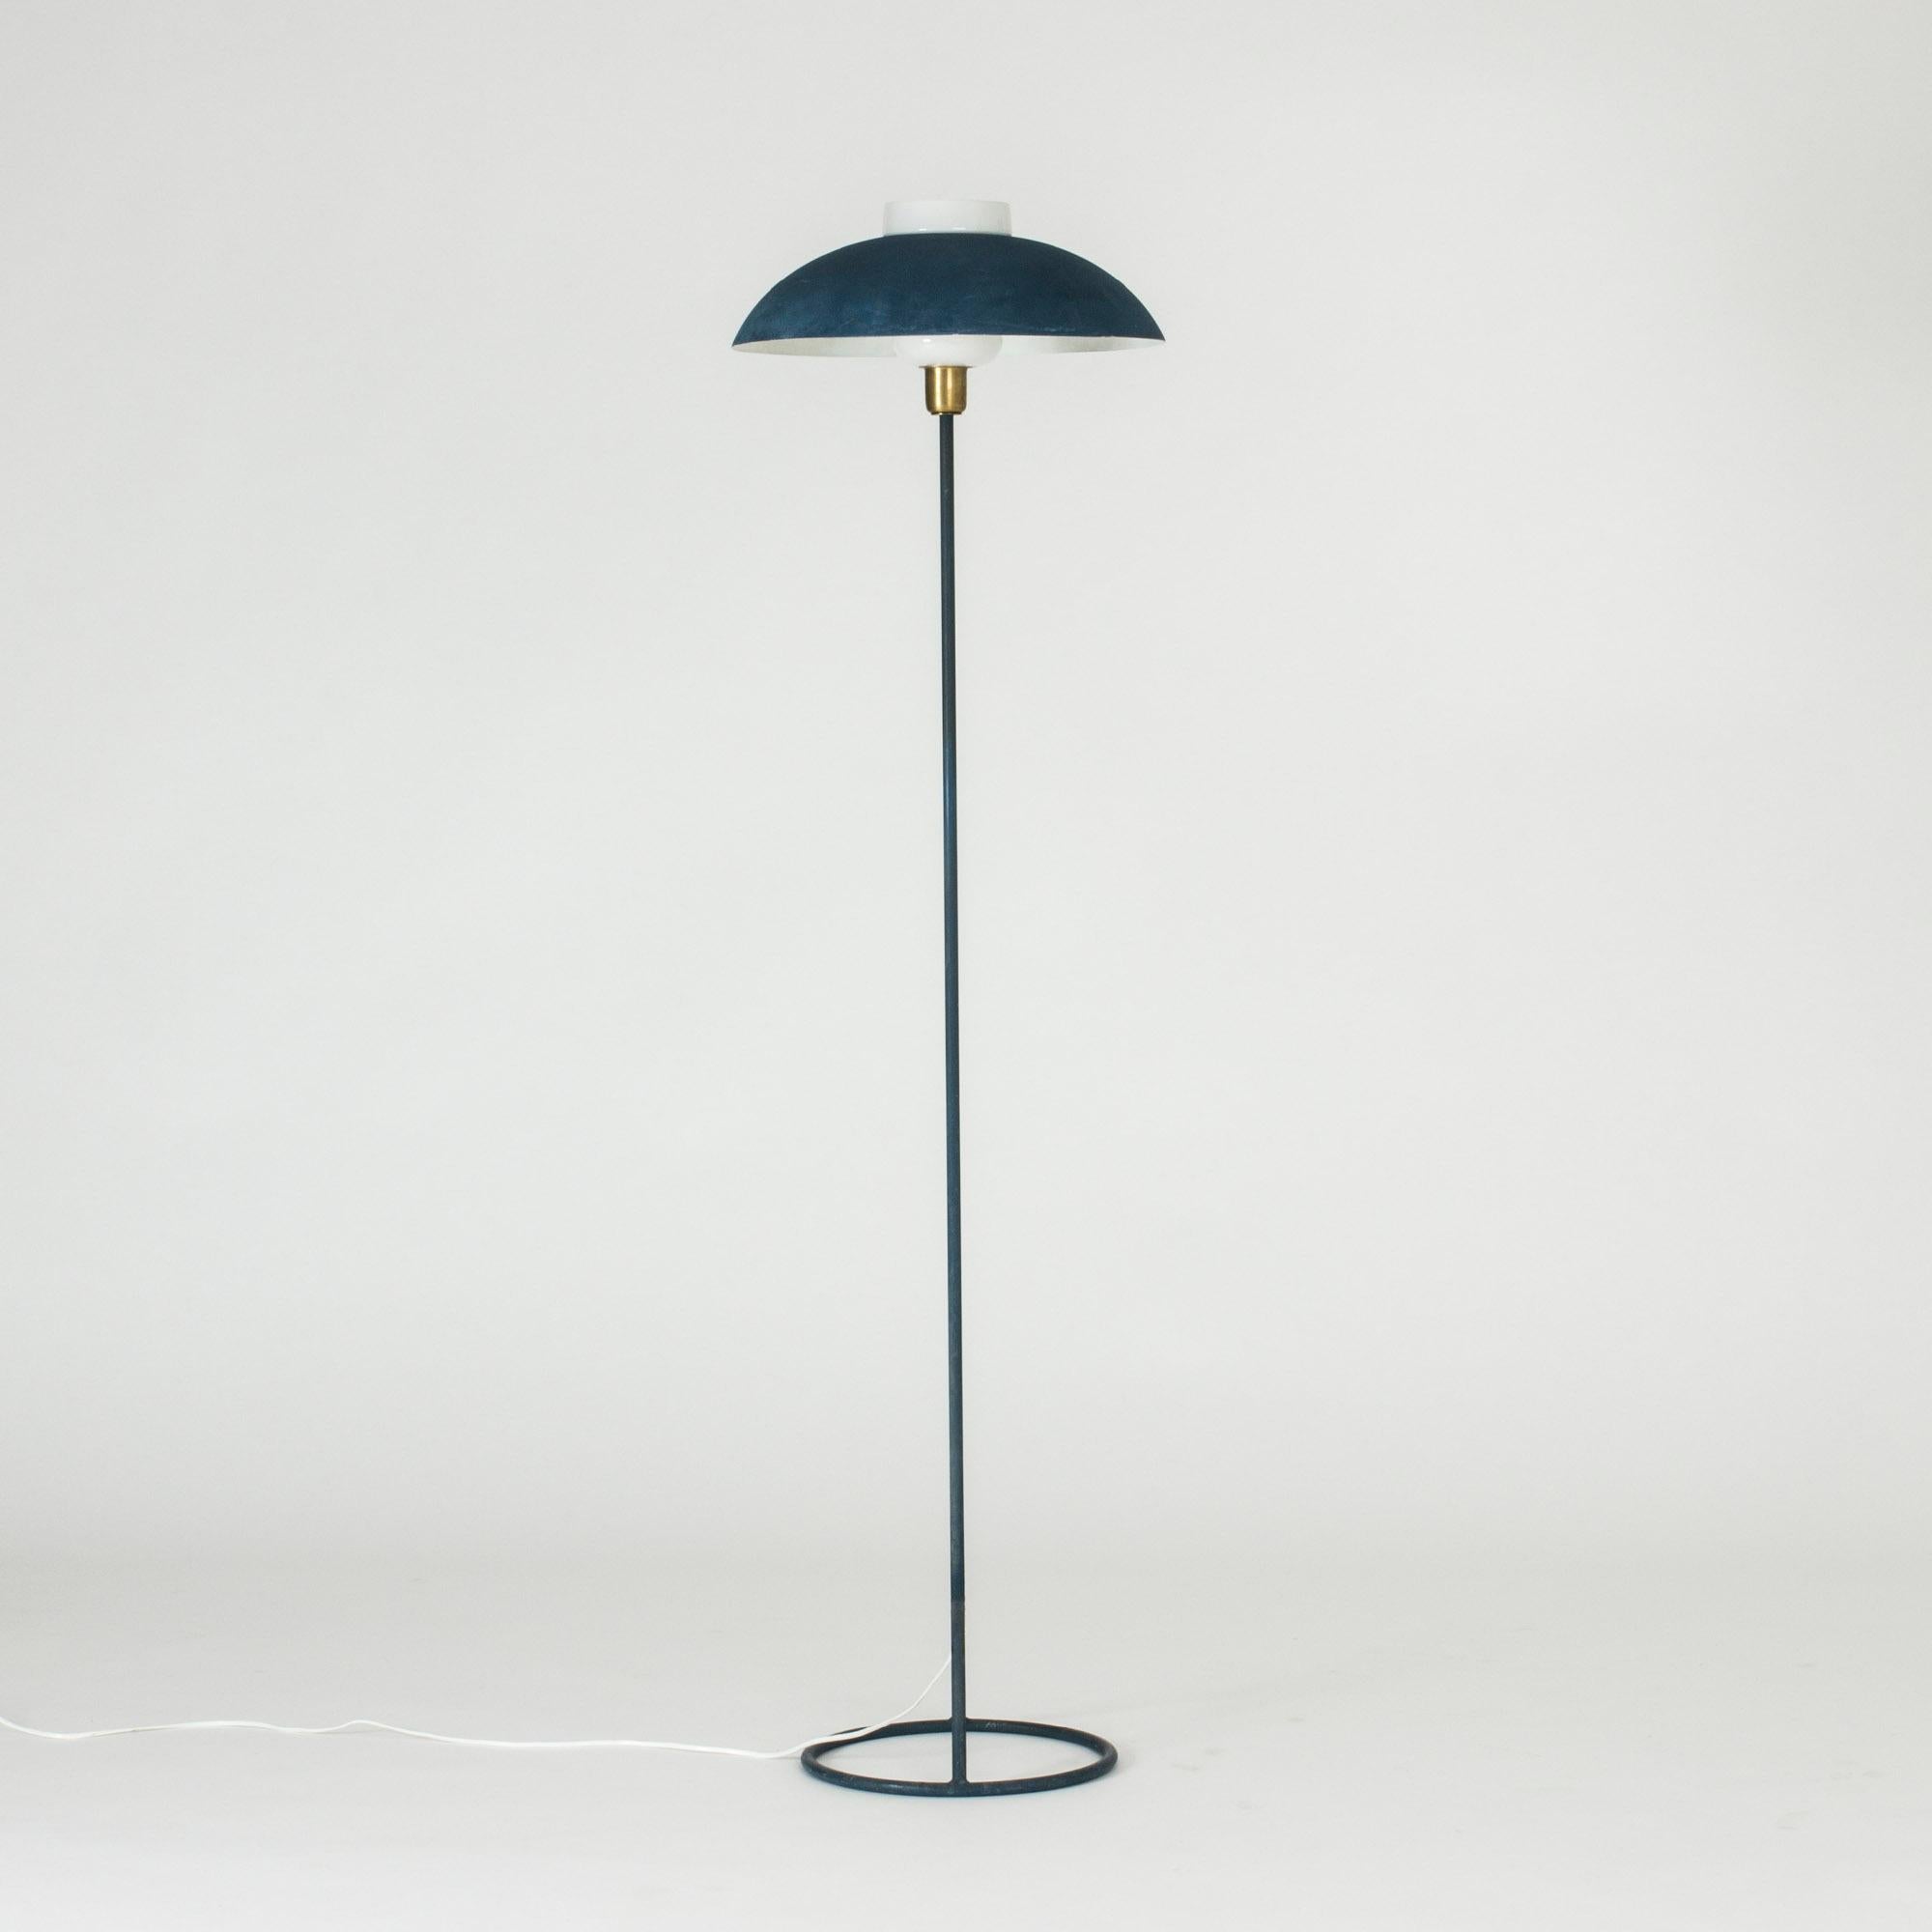 Striking metal floor lamp by Bertil Brisborg, with an exceptionally cool open space base. The lamp is lacquered blue in a grainy lacquer. Industrial, graphic design.